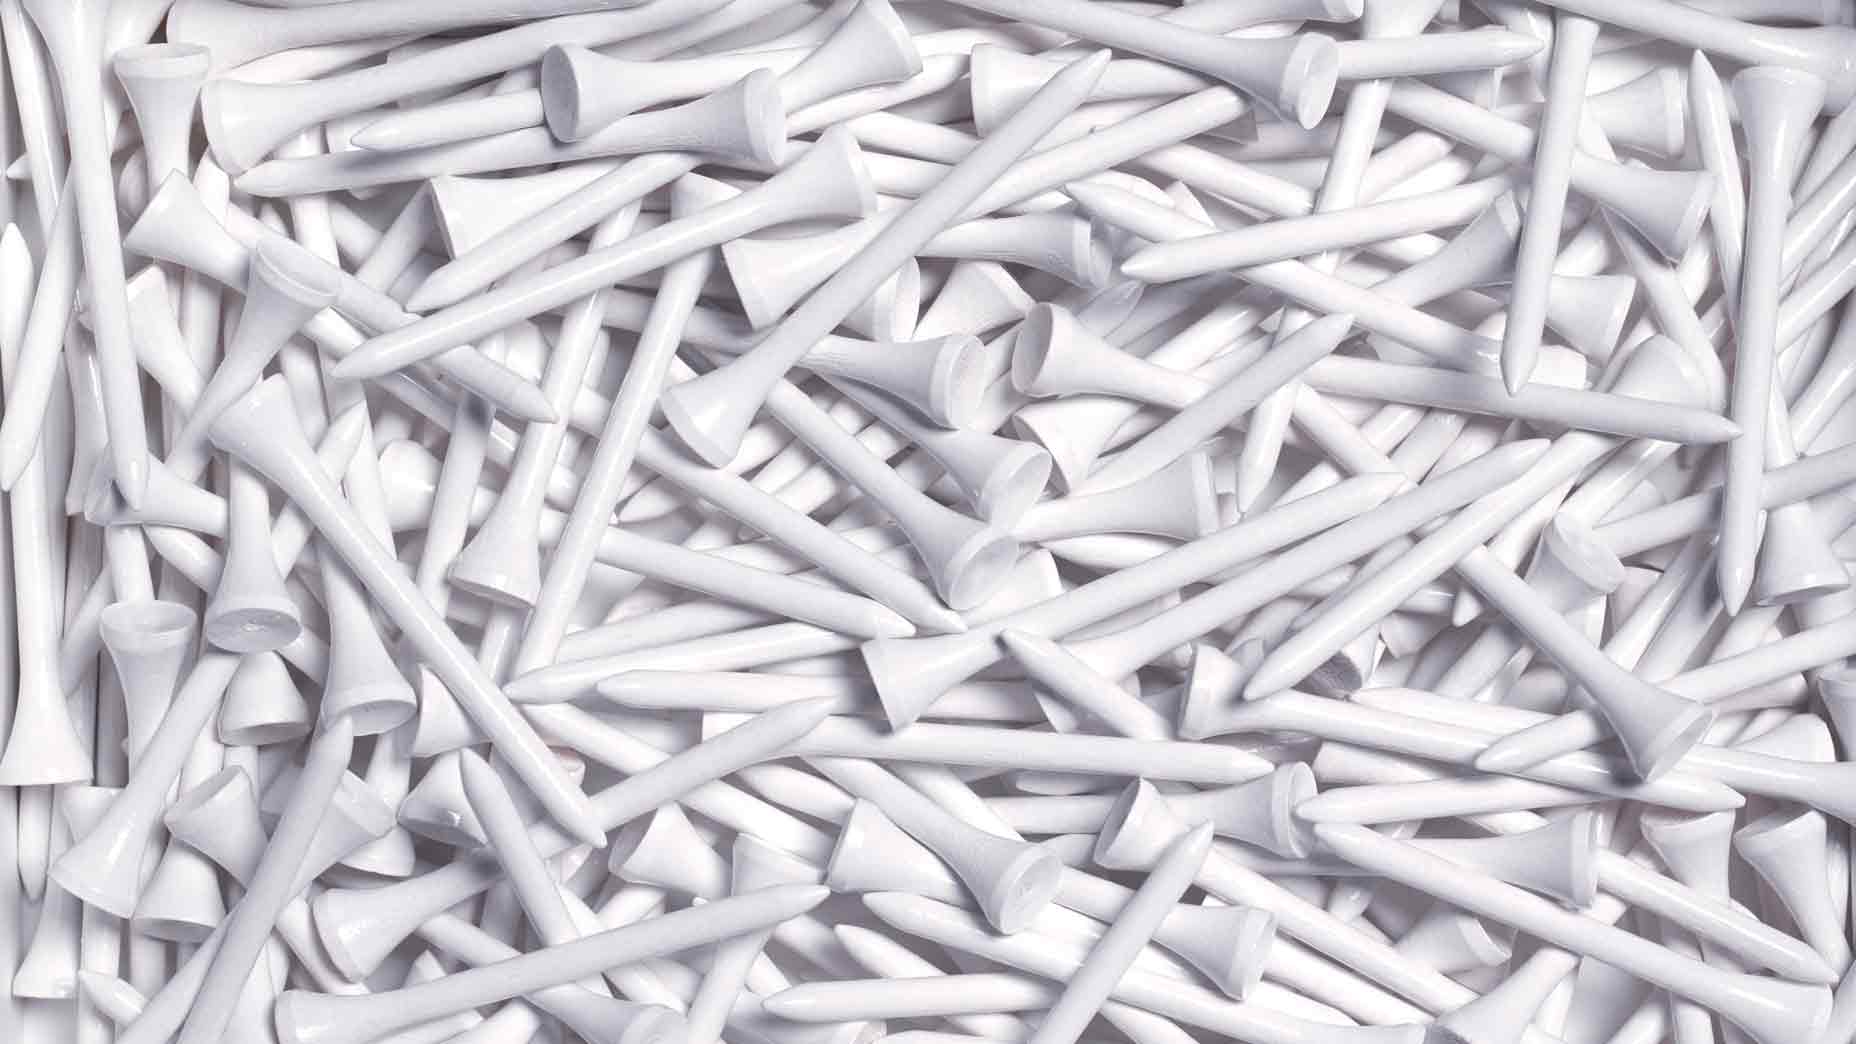 A large pile of white golf tees in a random order